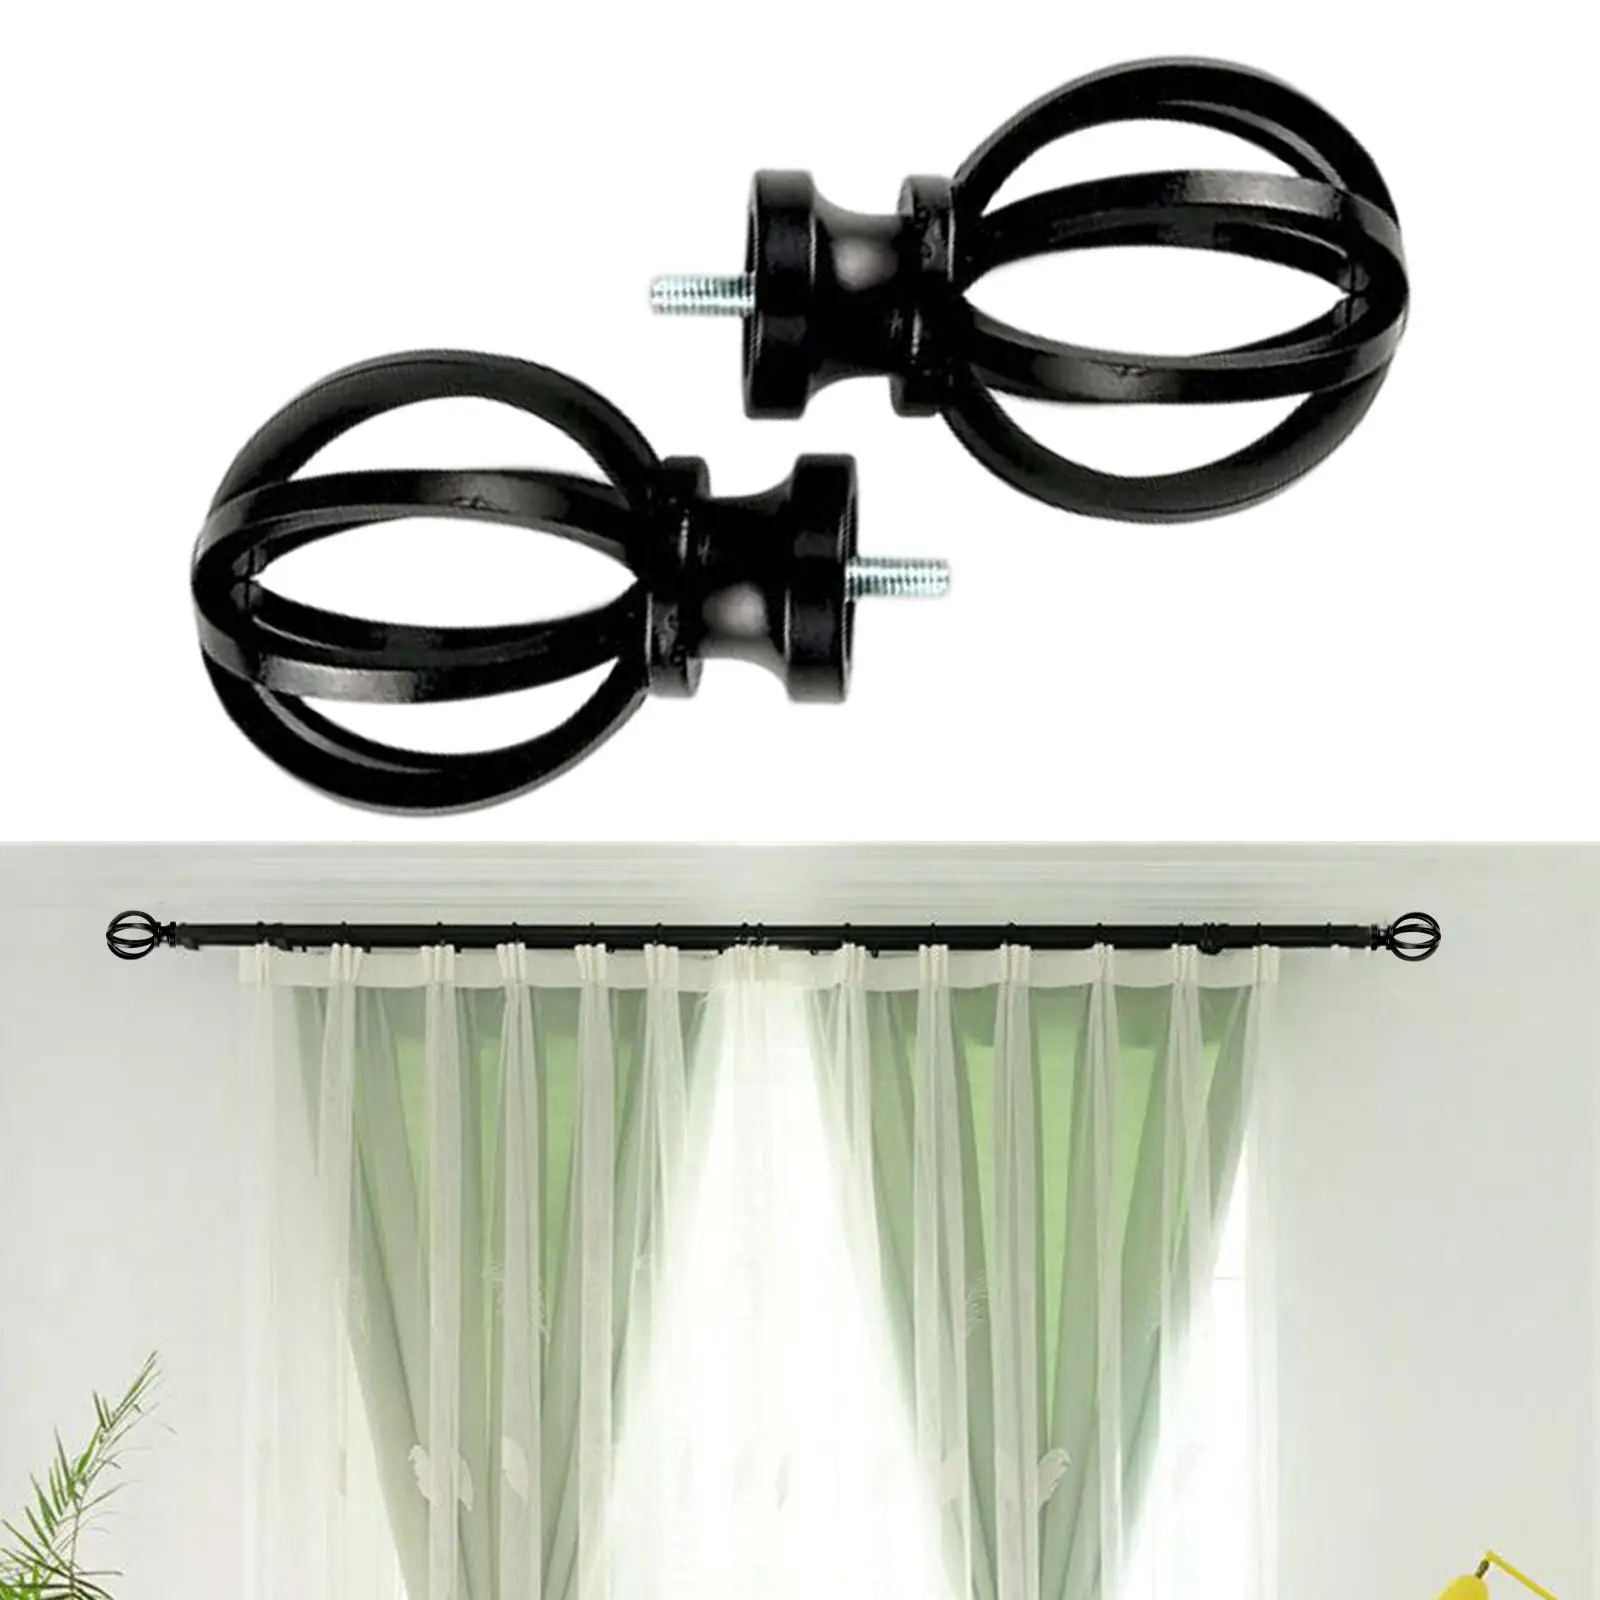 2 Pieces Cage Window Curtain Rod Finial Ends 5/8 inch Diameter Decorative Vintage Drapery Rod Finials for Bathroom Living Room